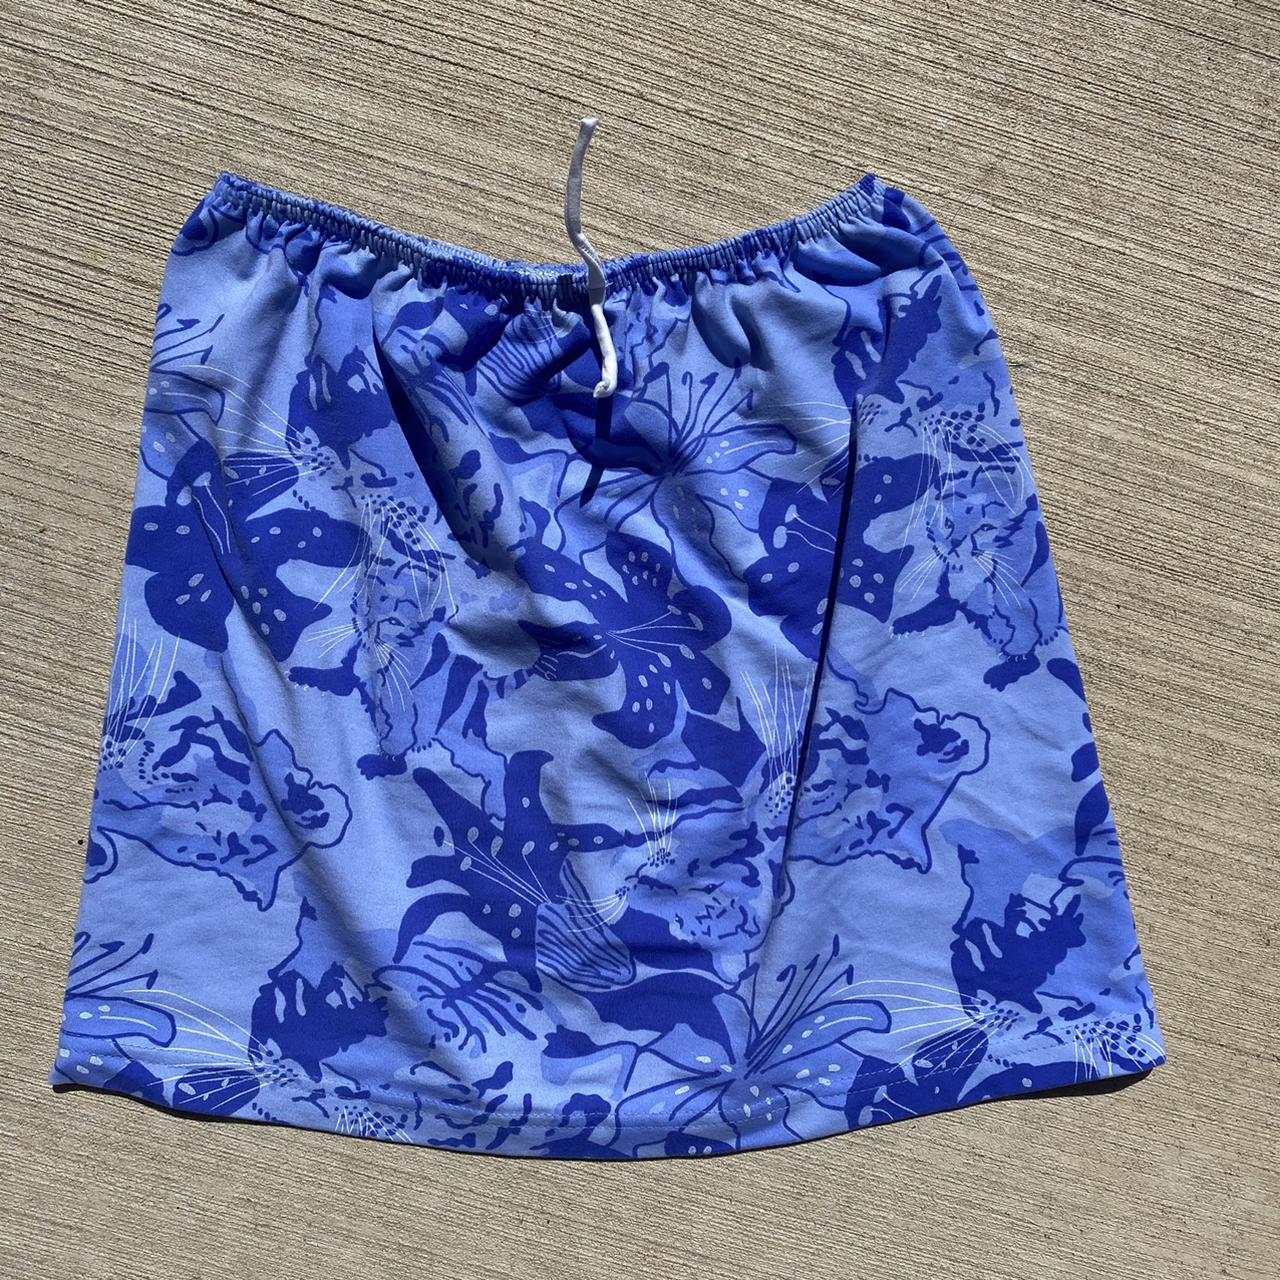 Tropical print skirt with baby tigers on it Such an... - Depop